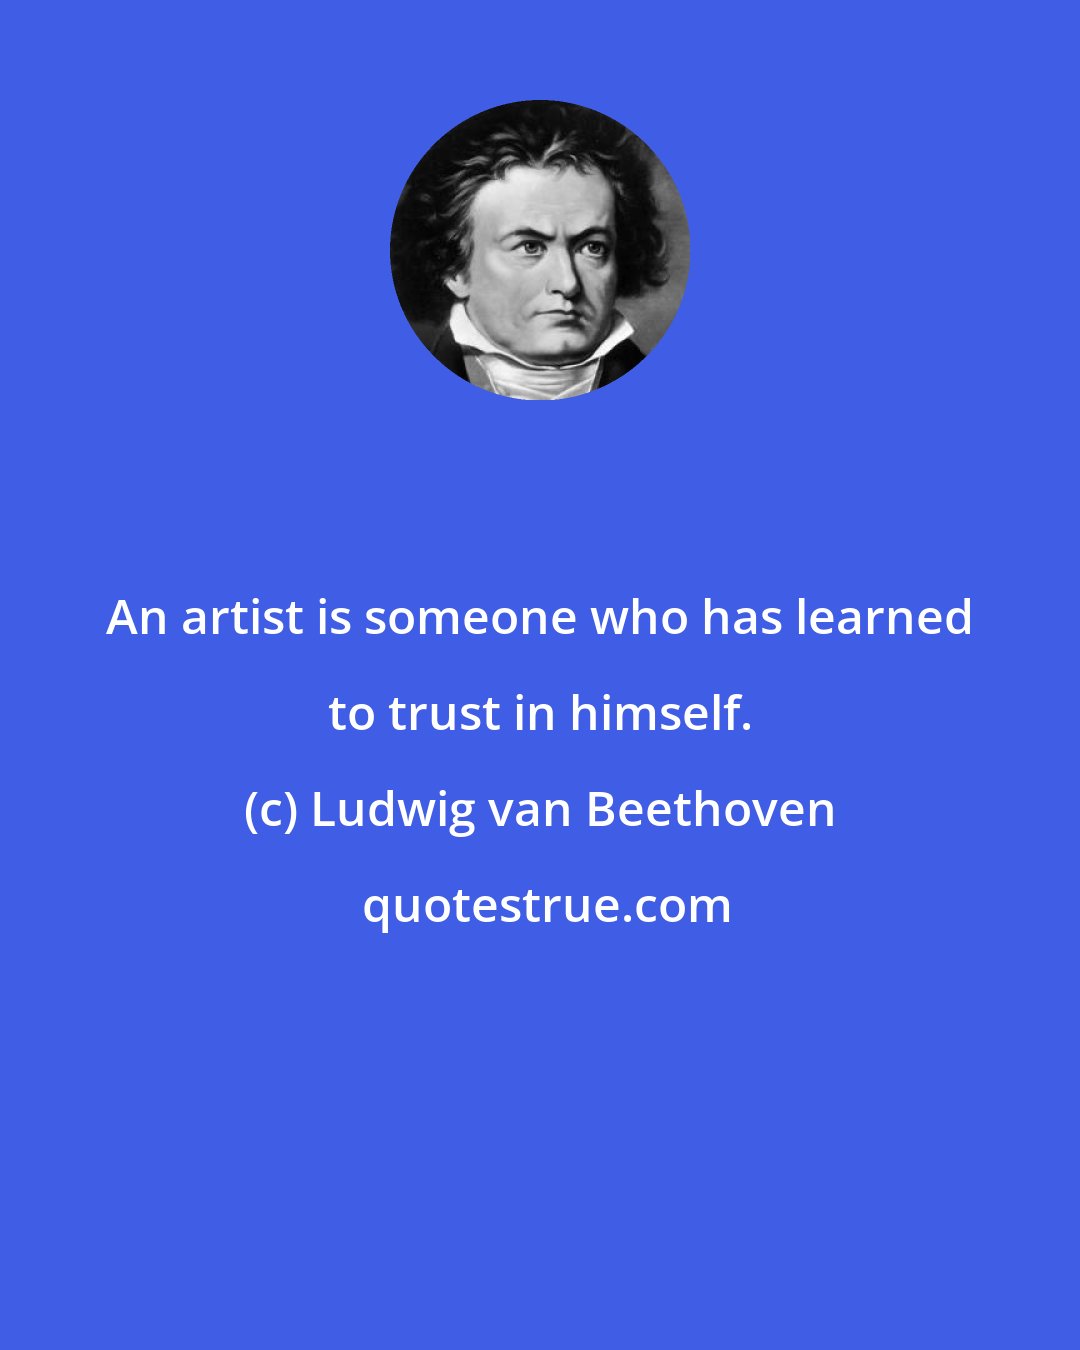 Ludwig van Beethoven: An artist is someone who has learned to trust in himself.